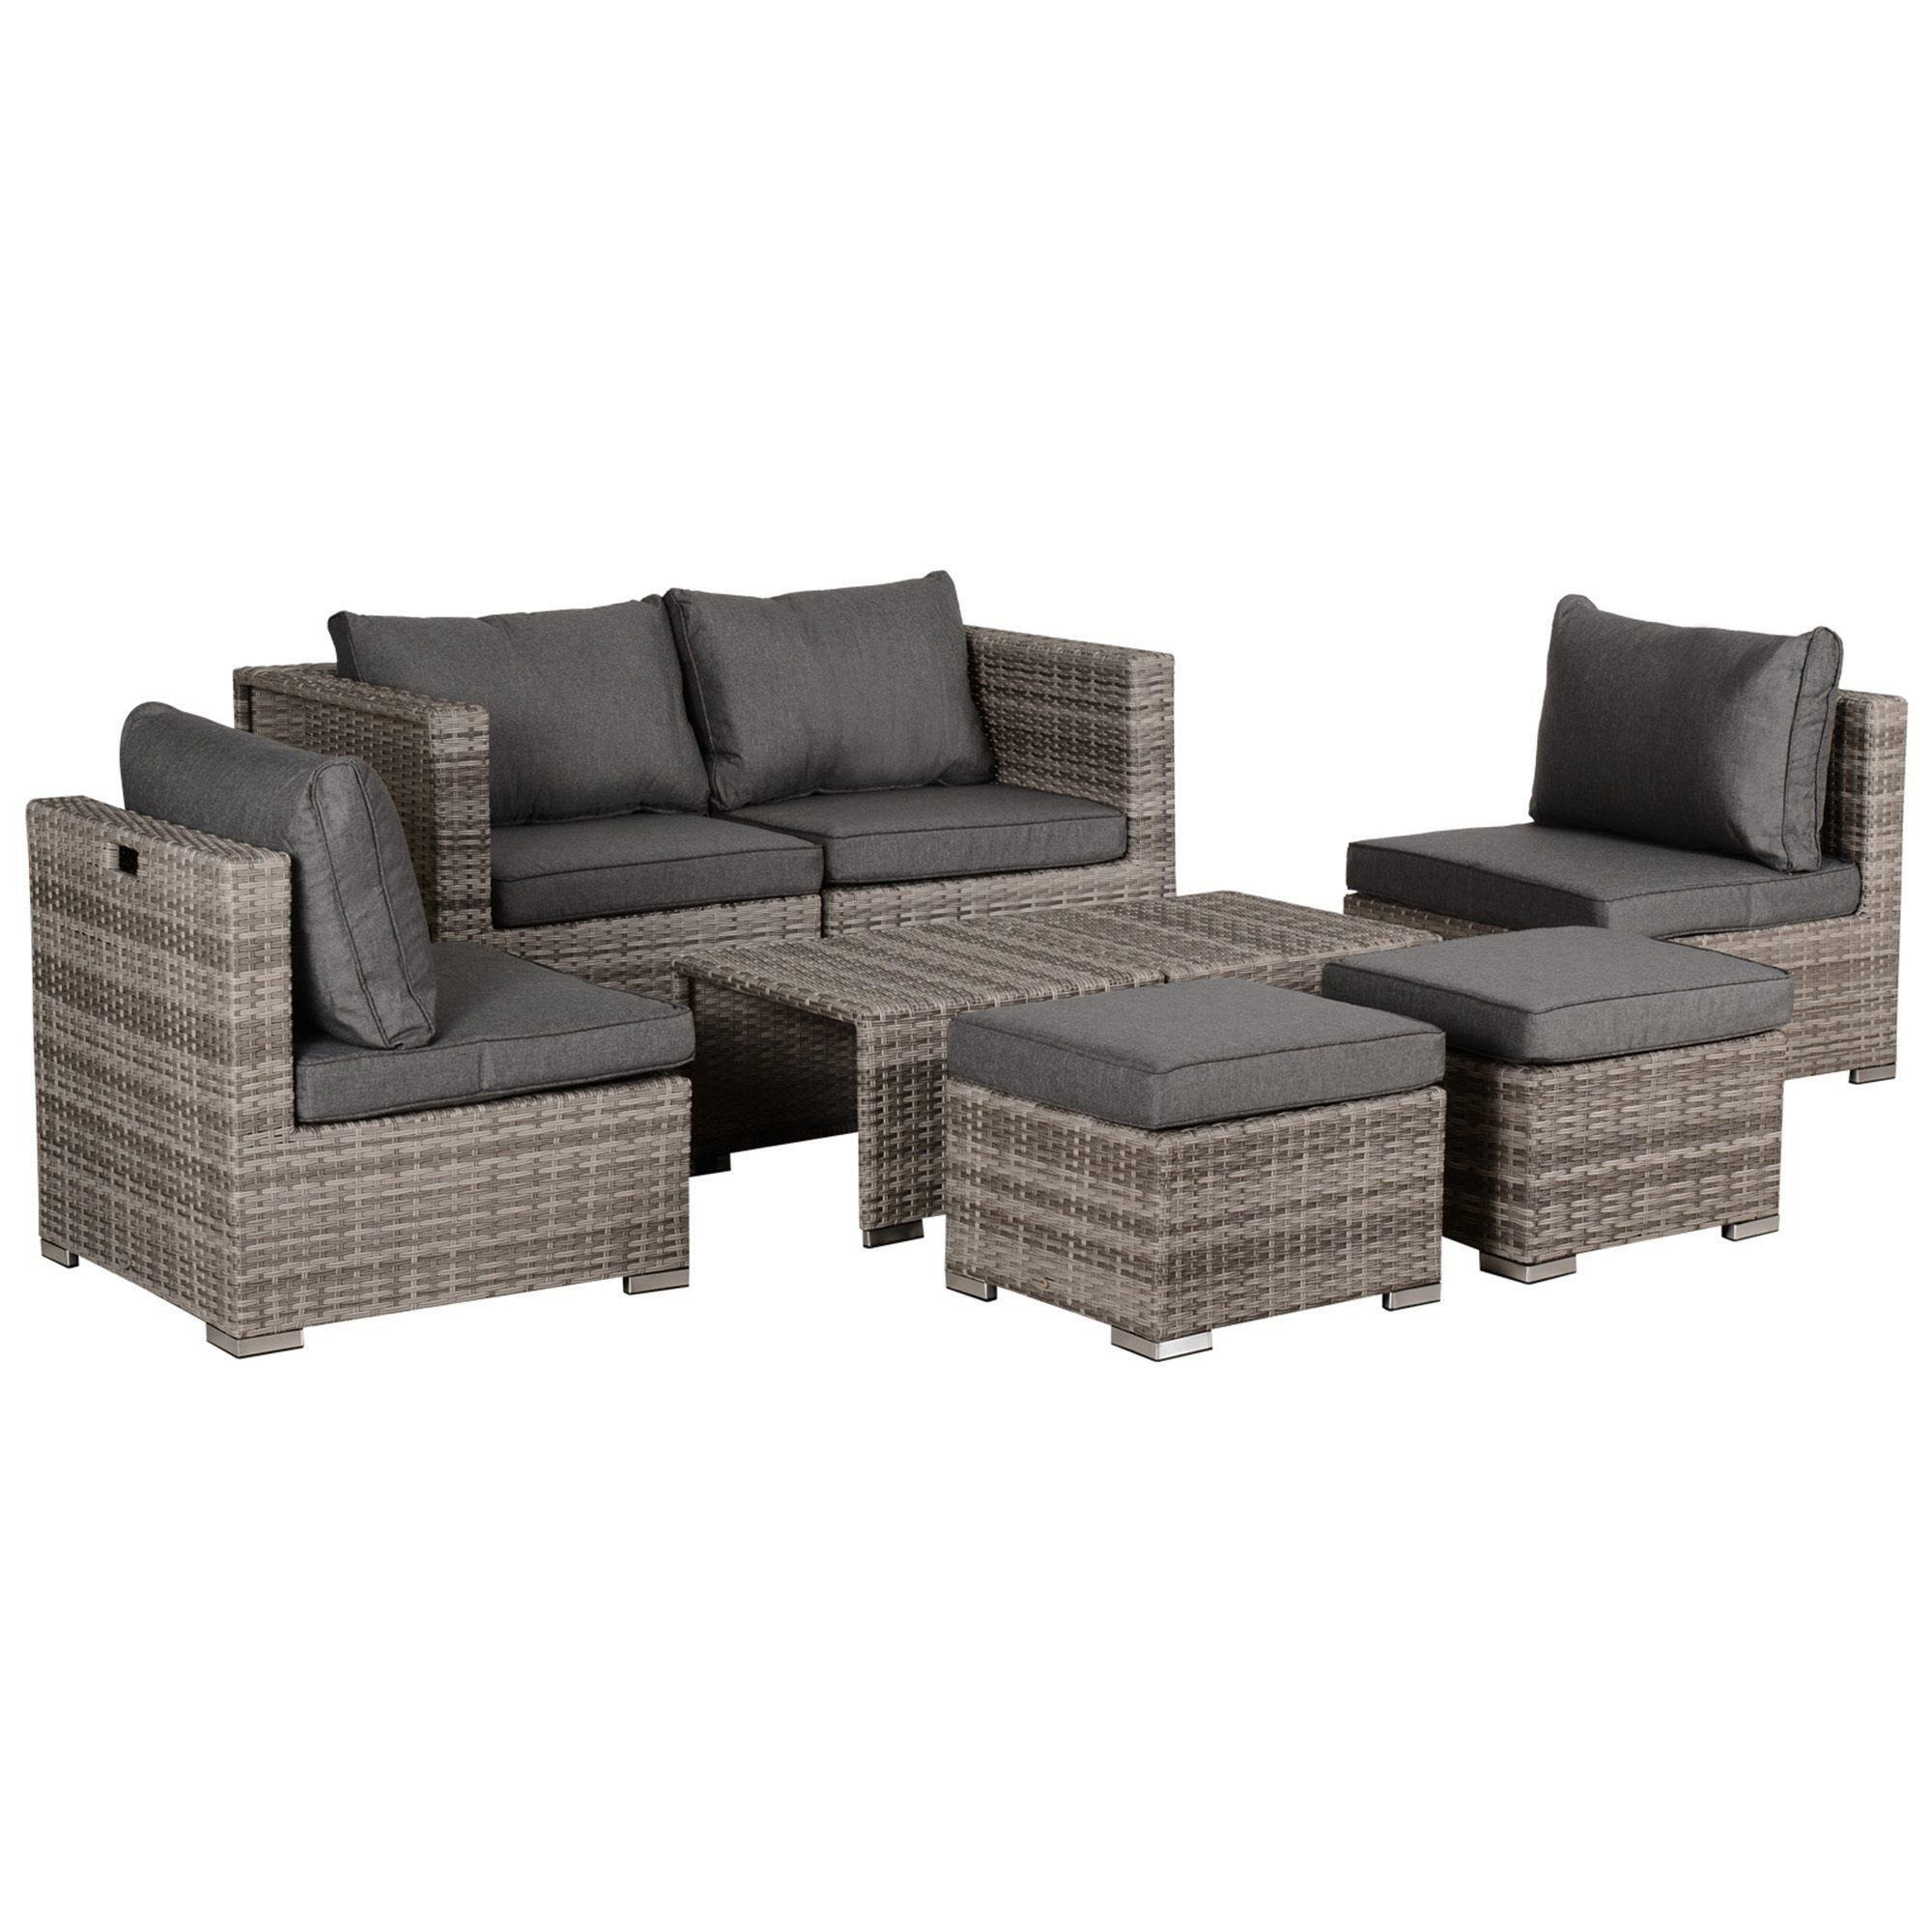 8pc Outdoor Patio Furniture Set Weather Wicker Rattan Sofa Chair - image 1